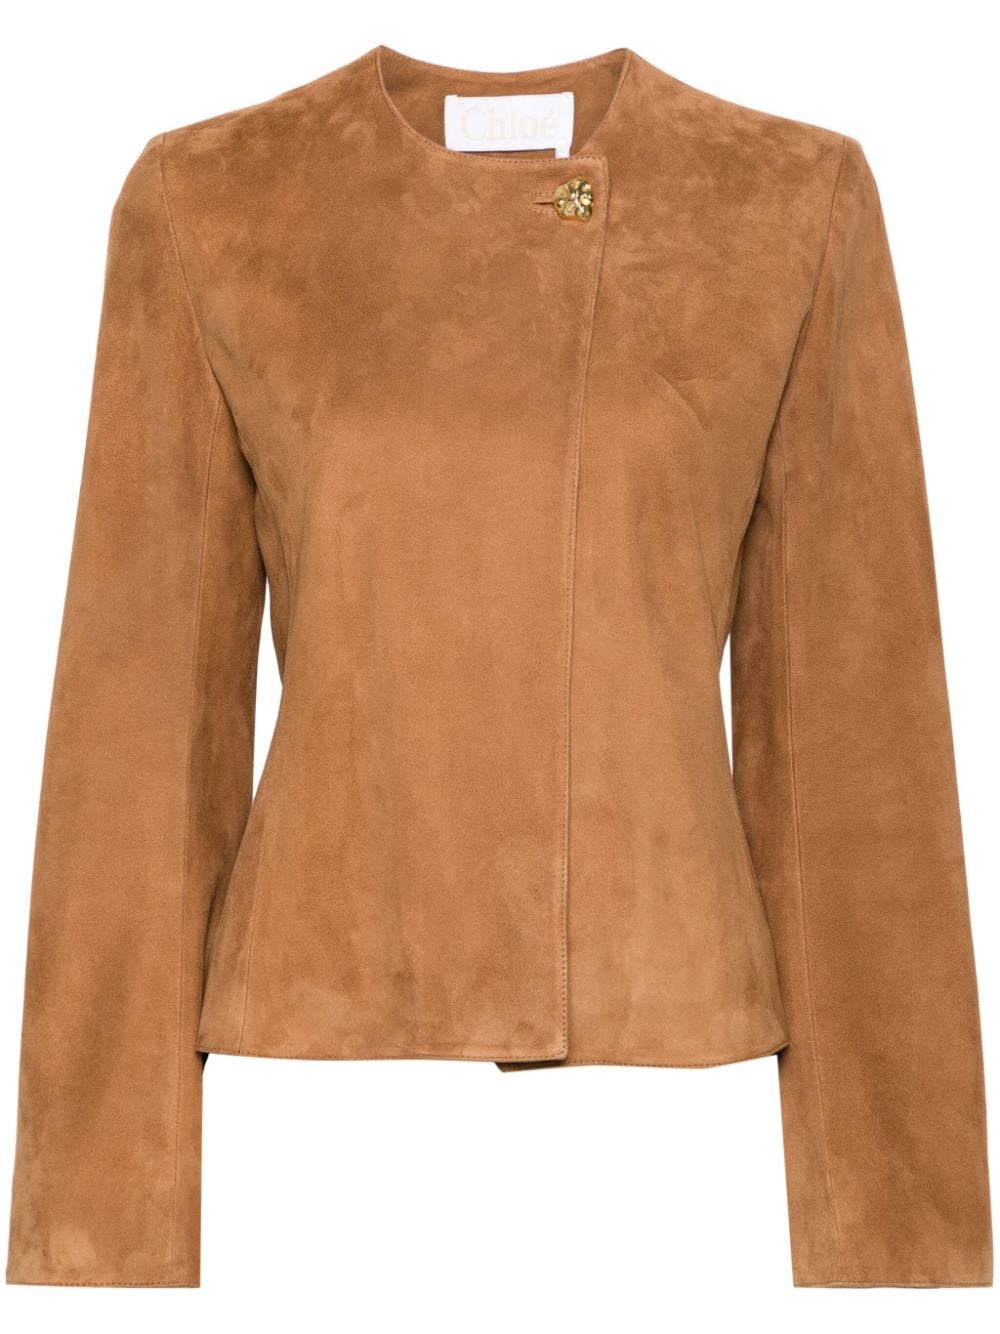 Chloé suede fitted jacket